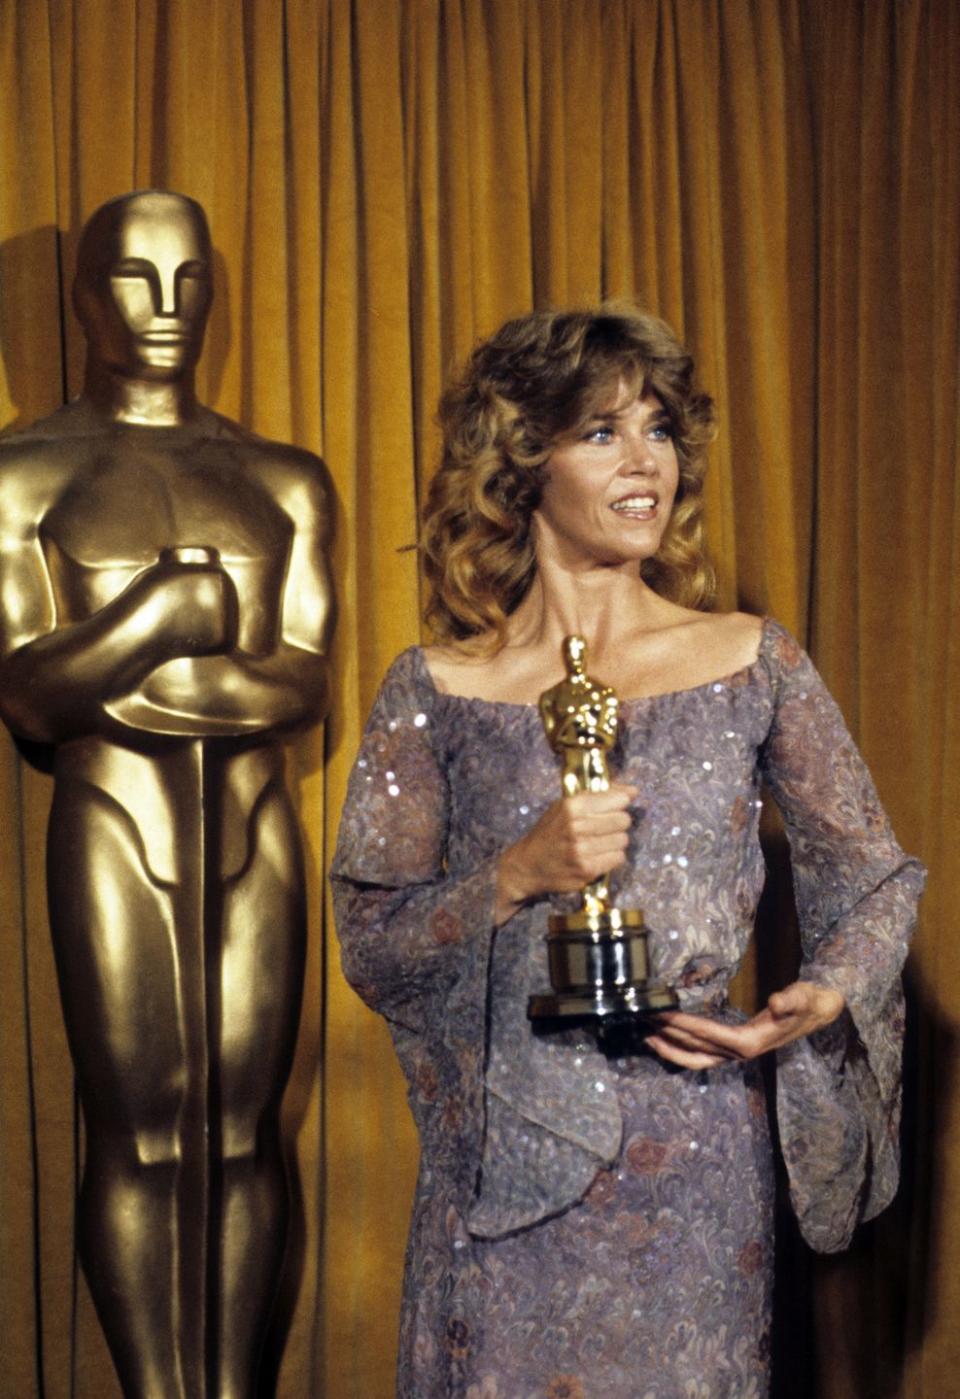 <p>Here, Fonda poses backstage with her Oscar at the 51st annual Academy Awards. She had won Best Actress in a Leading Role for her portrayal of Sally Hyde in Hal Ashby's <em>Coming Home</em>.<br></p>